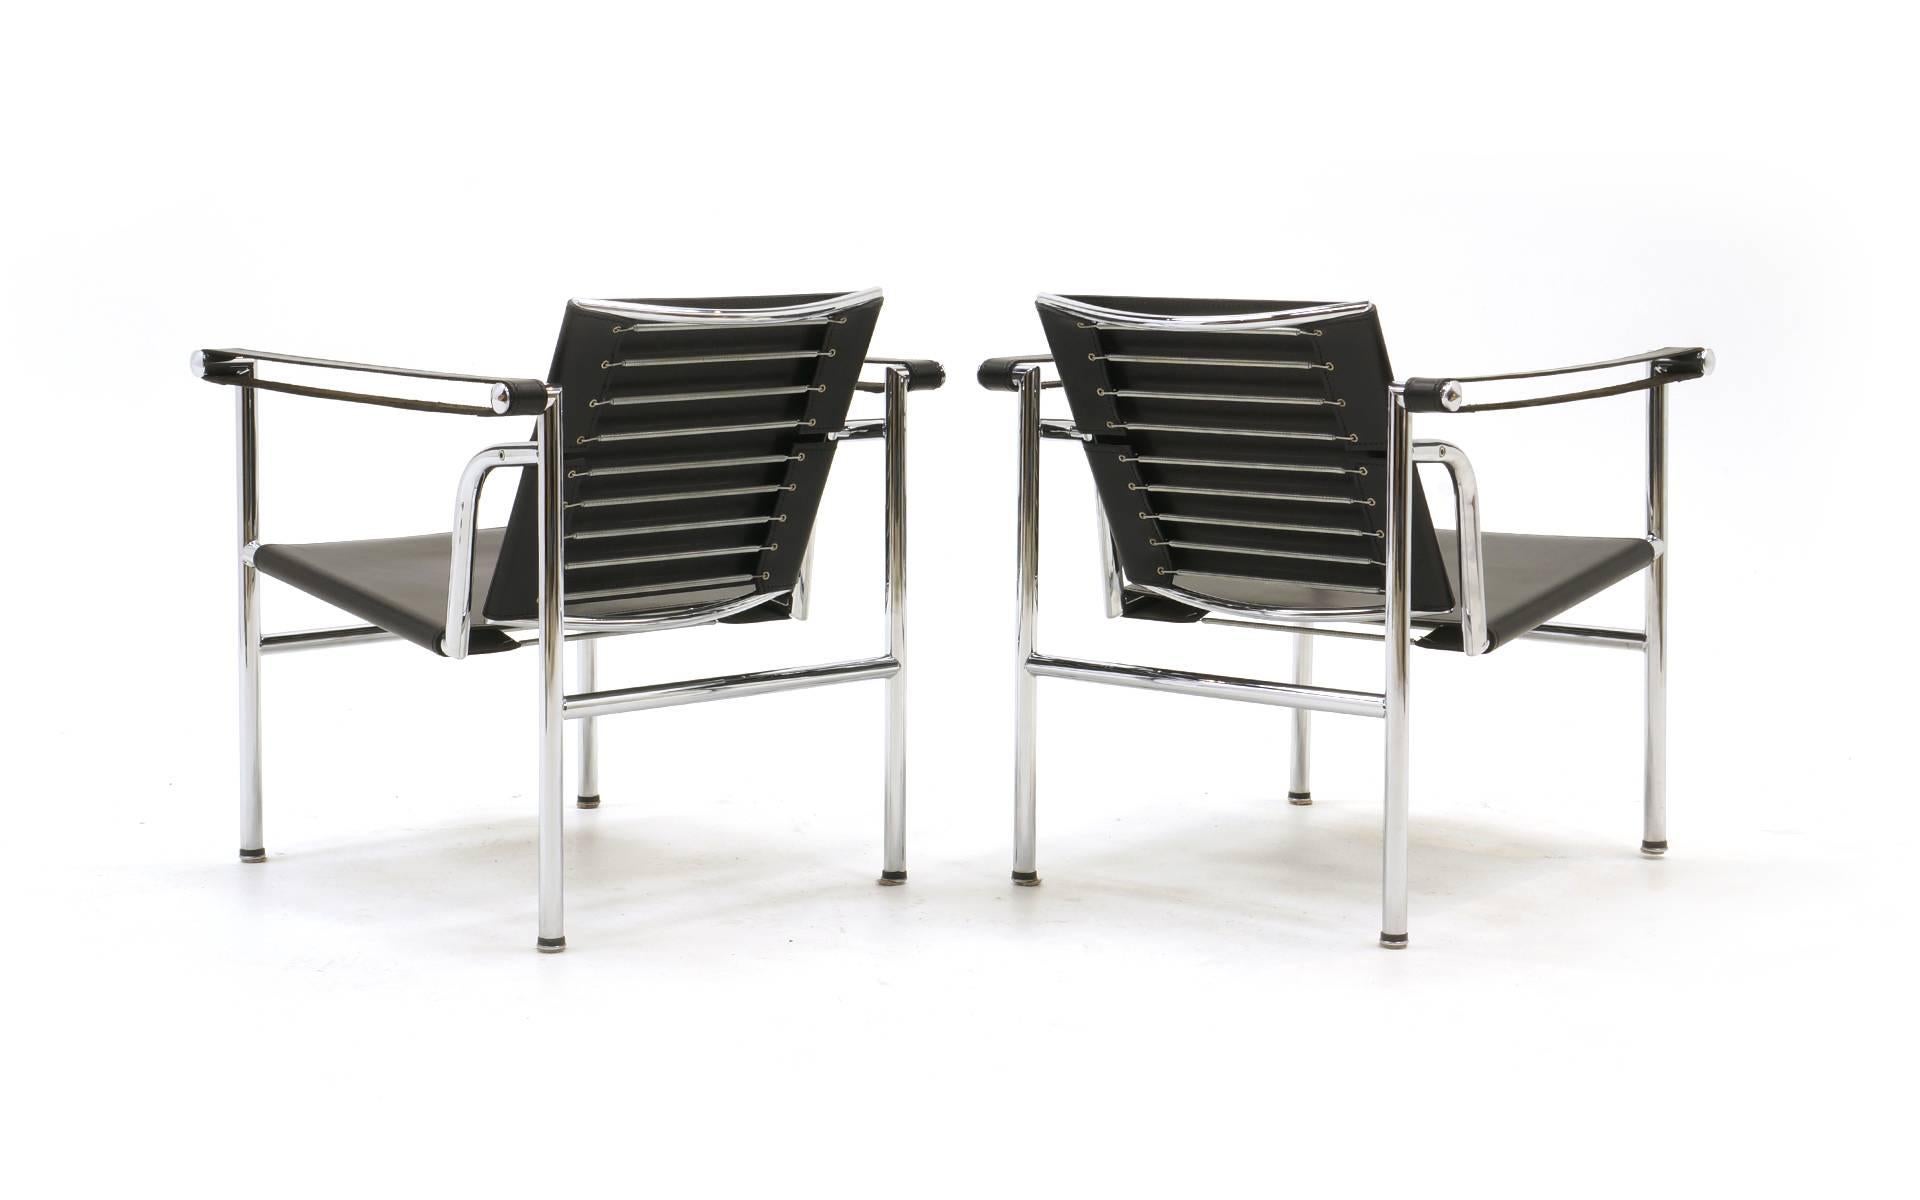 Italian Pair of LC1 Chairs Designed by Le Corbusier, Produced by Gavina